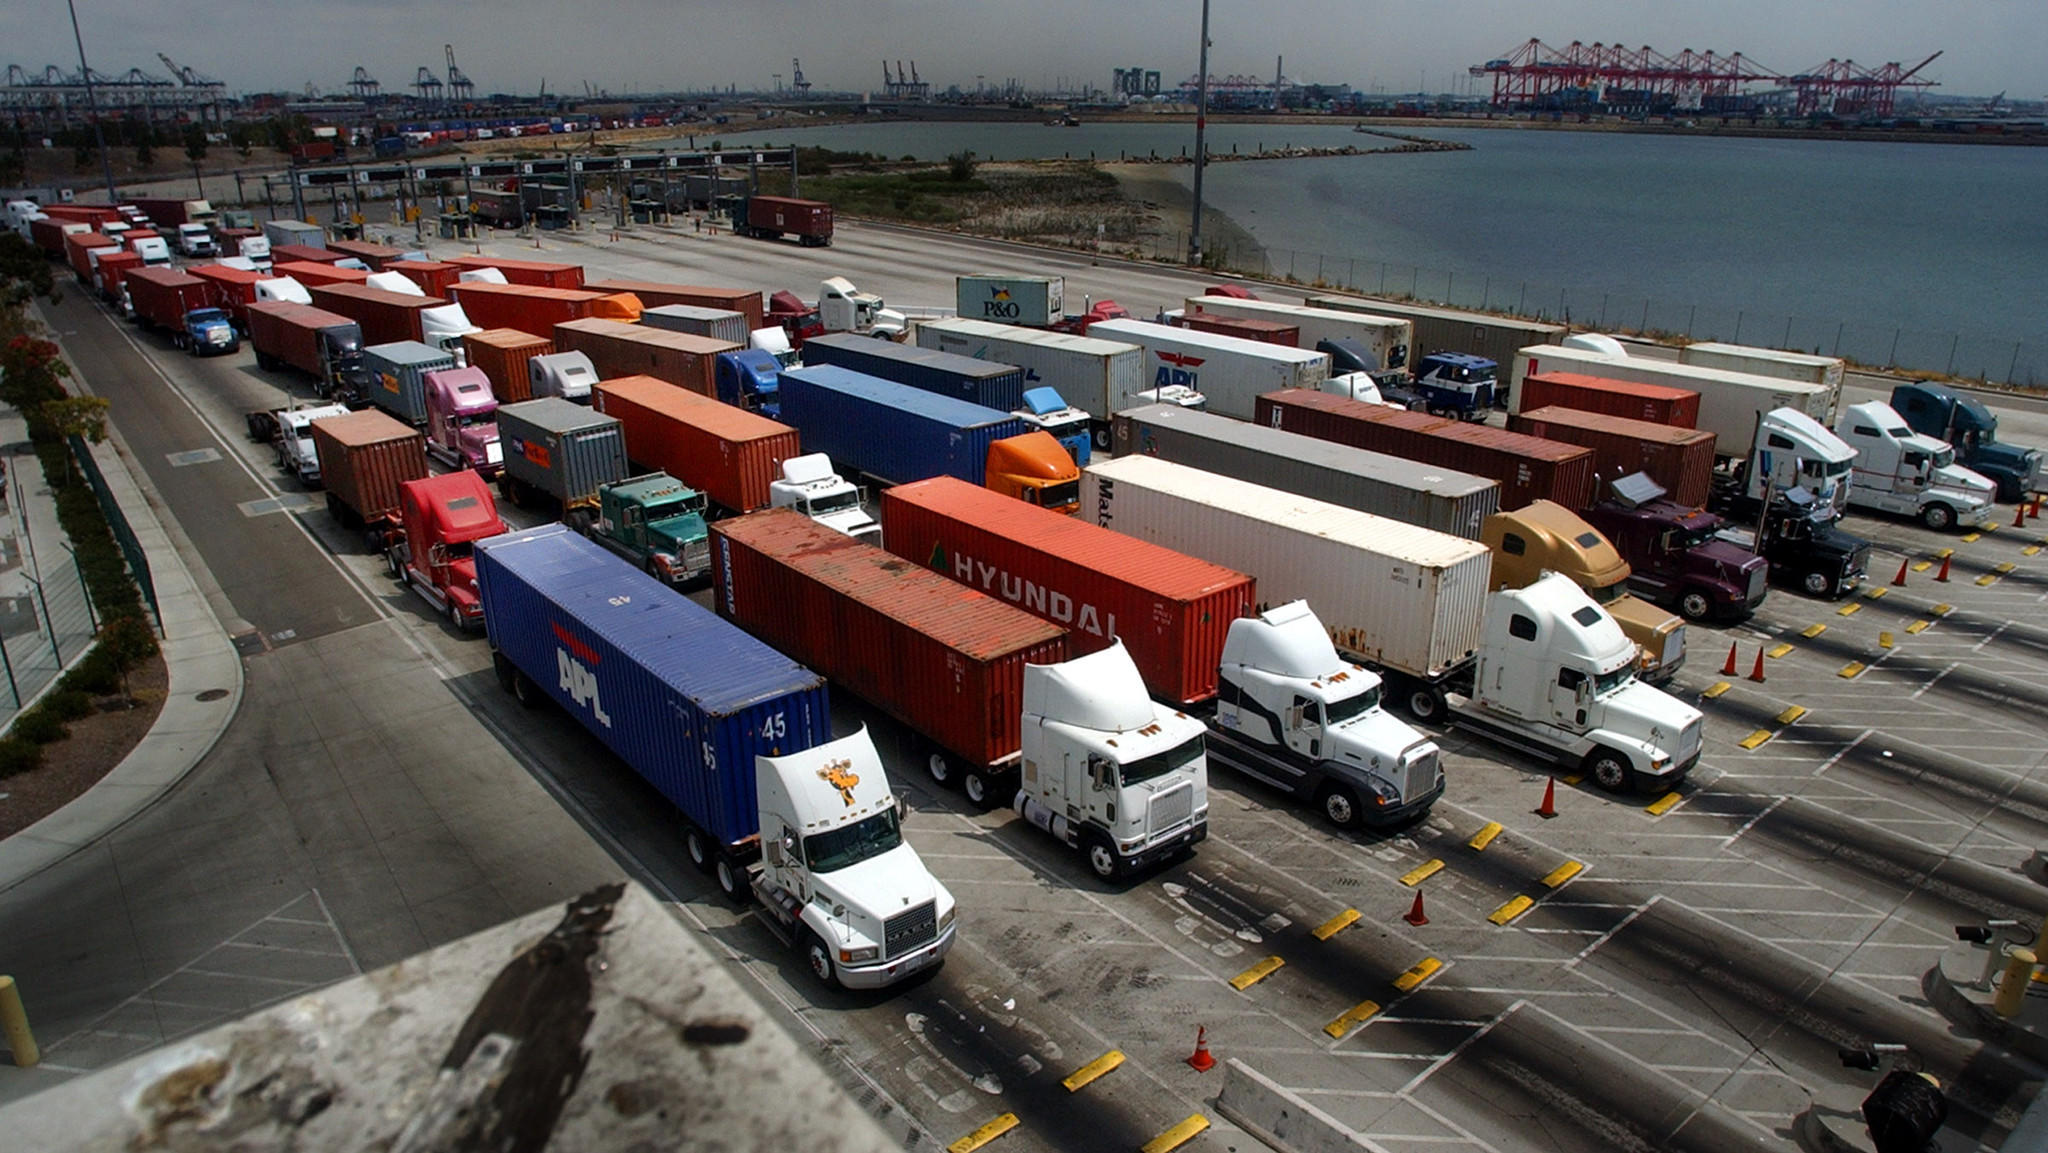 Labor group claims port trucking companies treat drivers unfairly - latimes